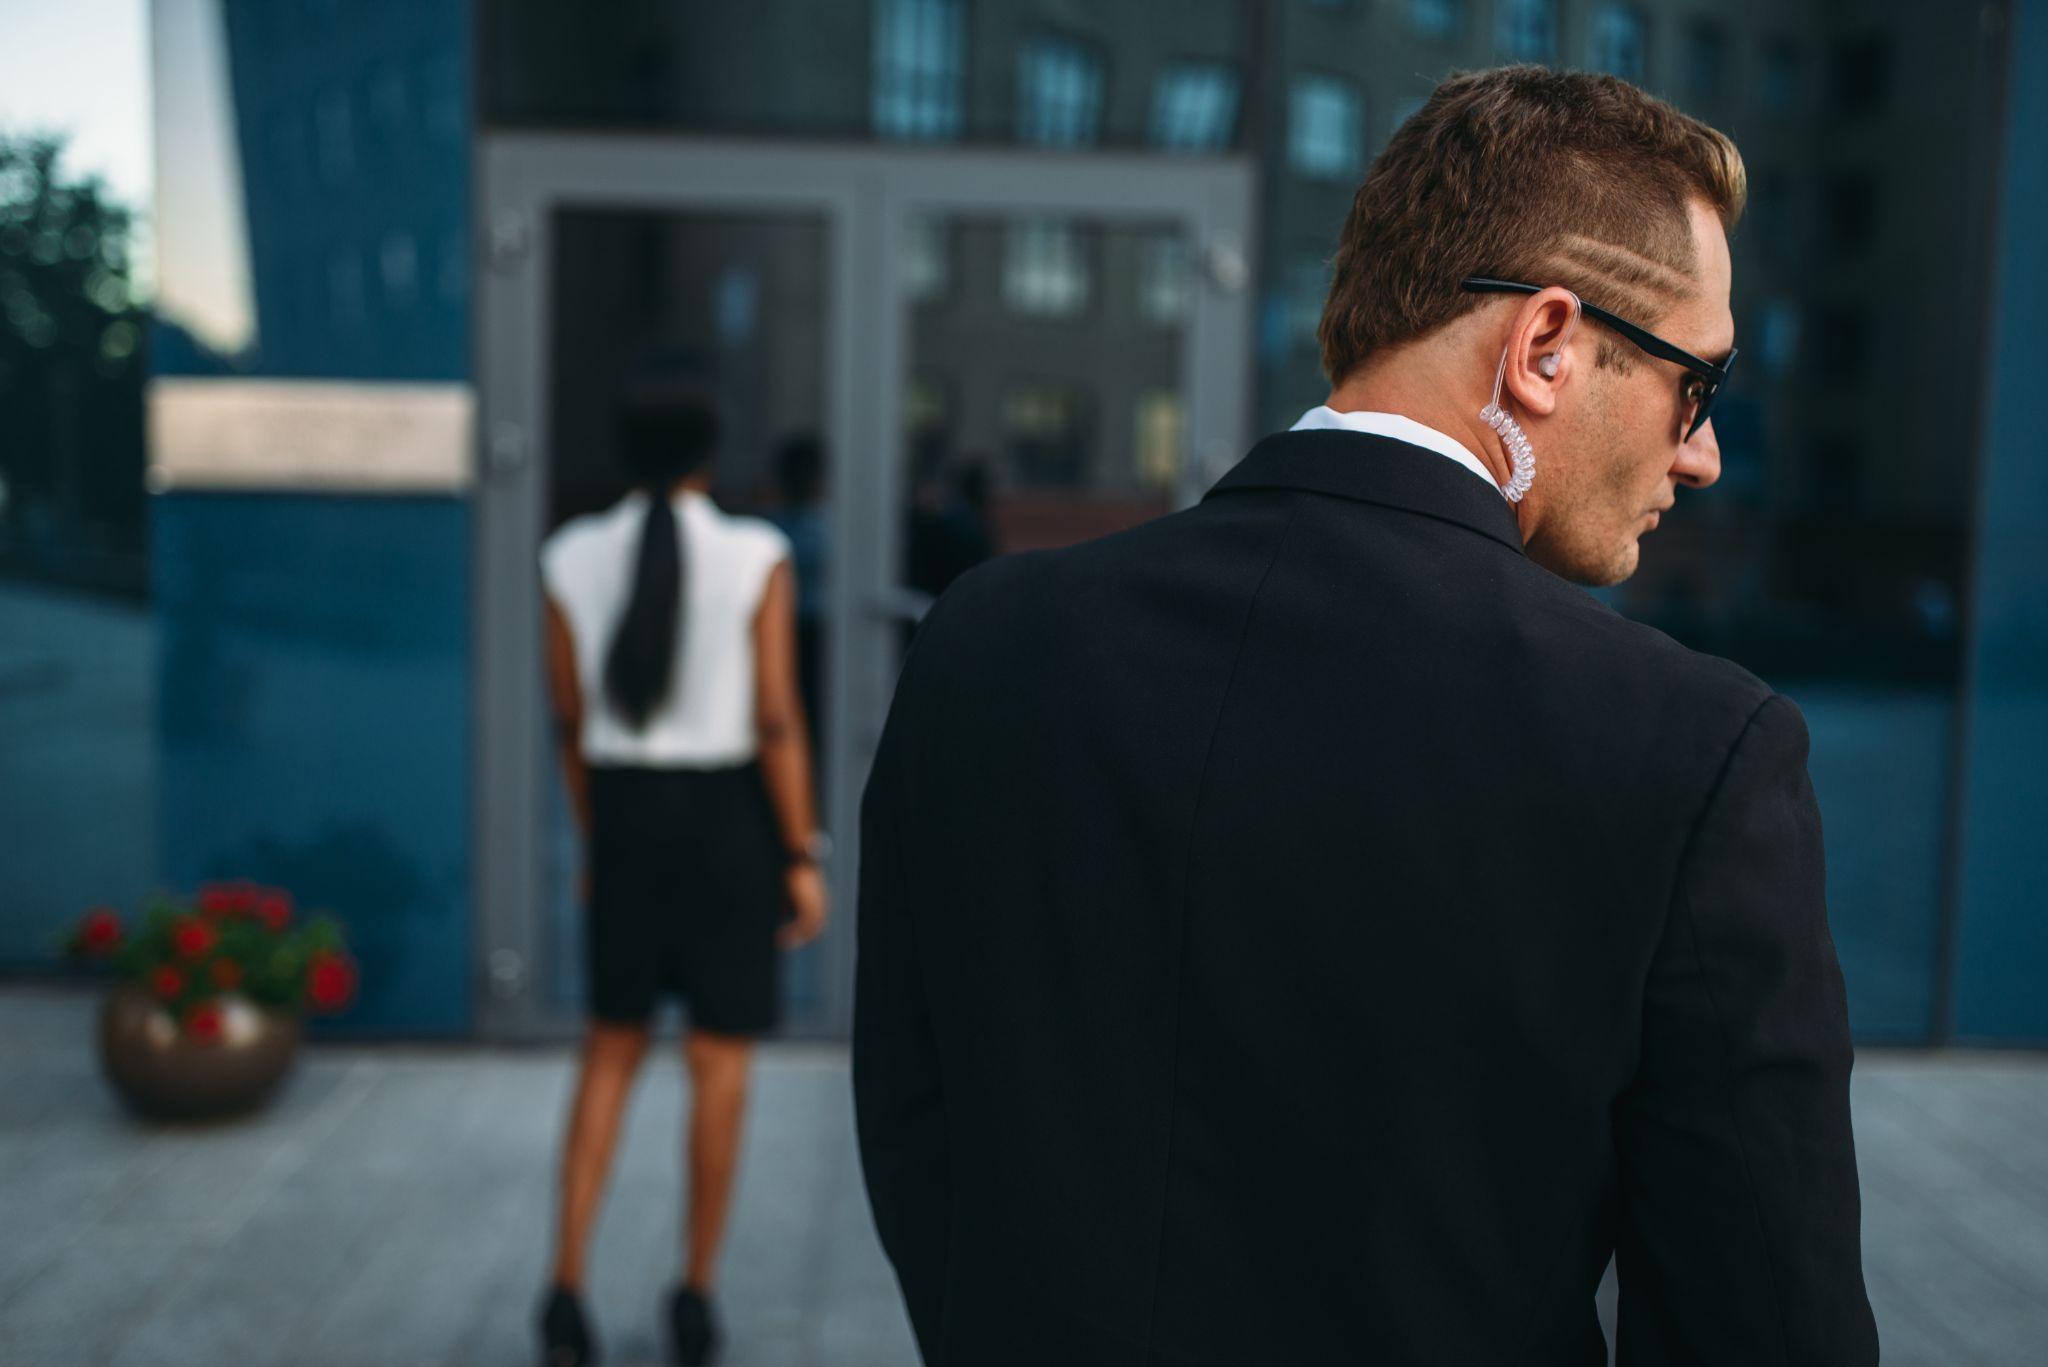 6 Types of People Who May Need to Hire a Personal Bodyguard